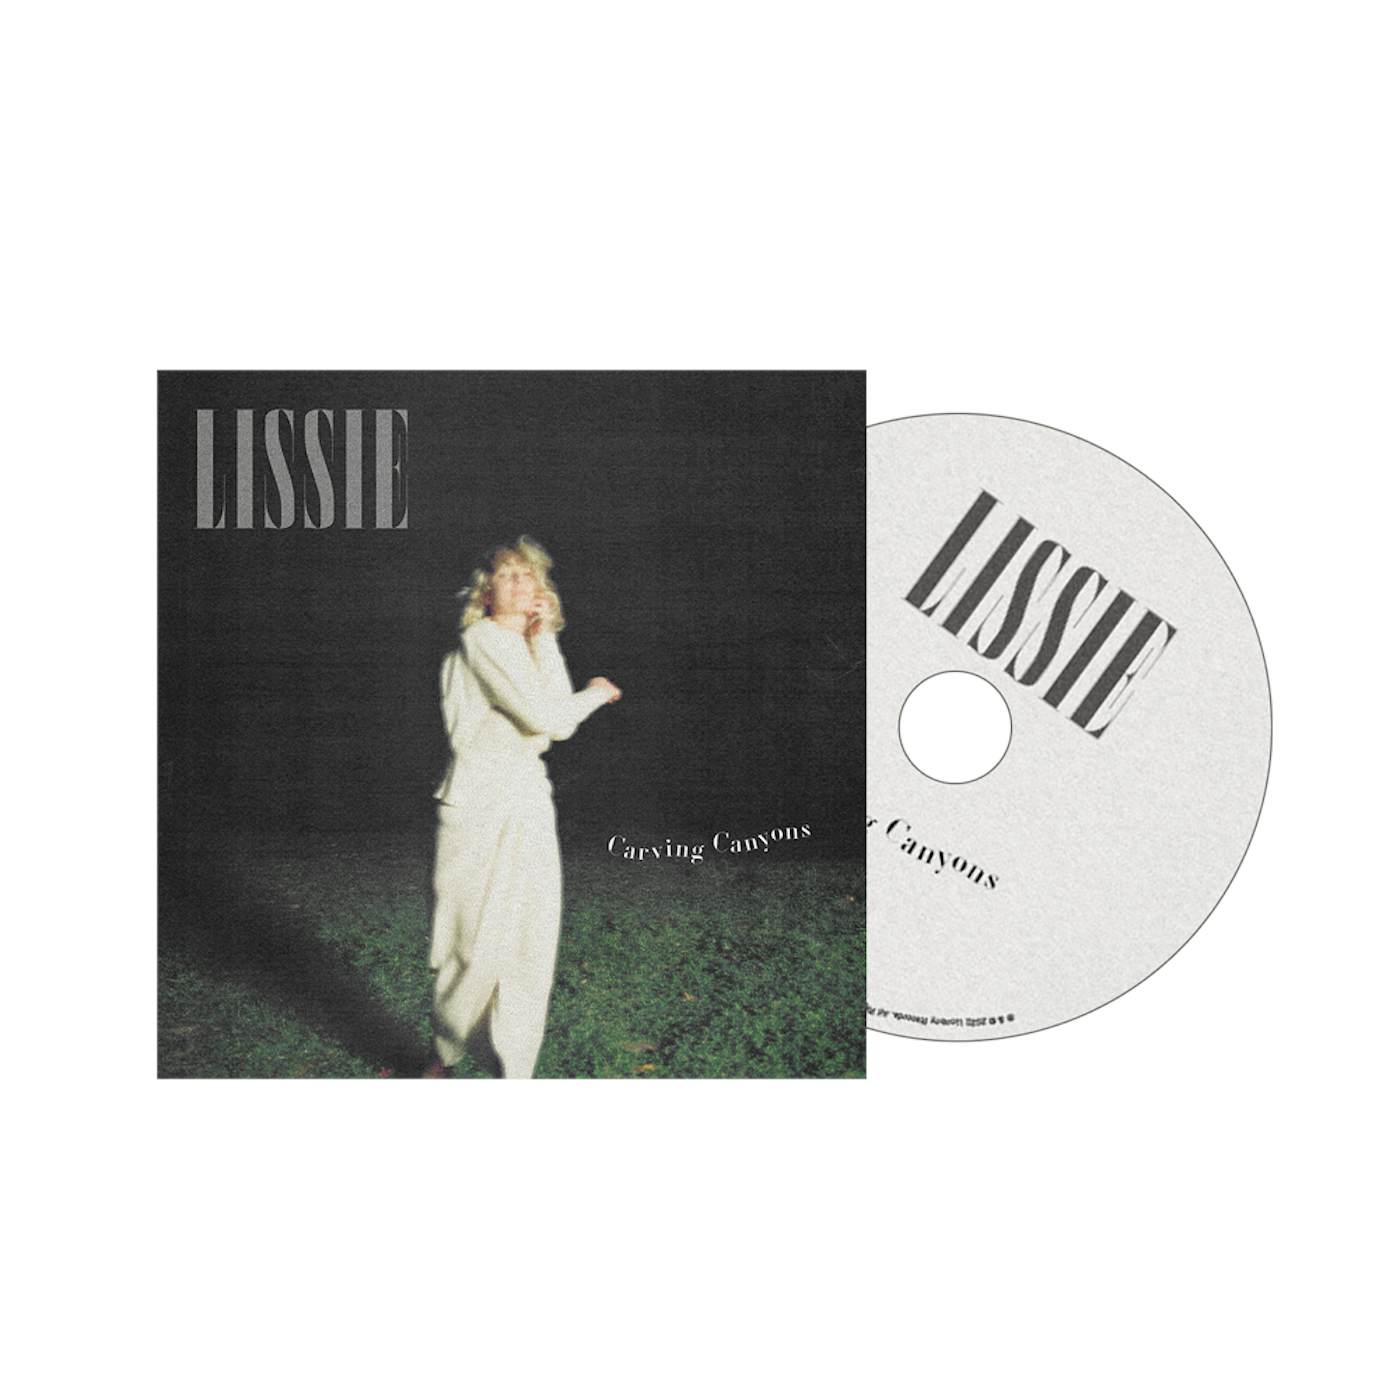 Lissie Carving Canyons - CD